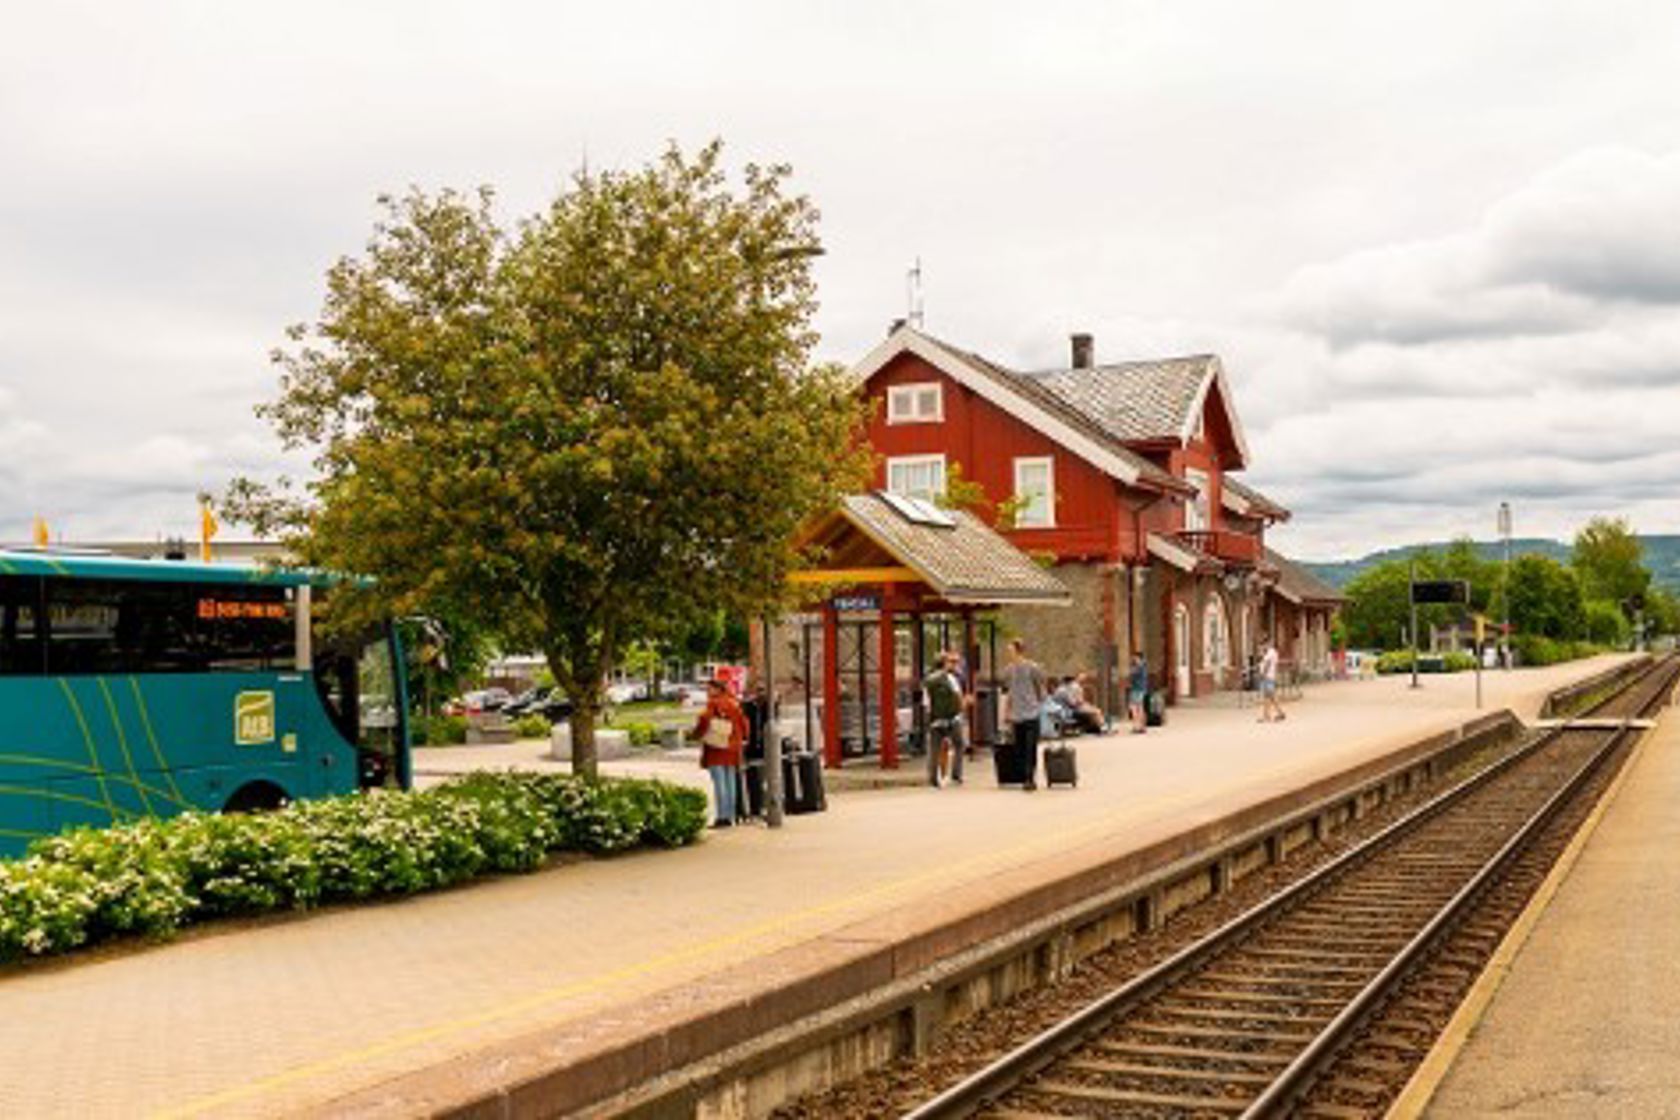 Exterior view of Verdal station